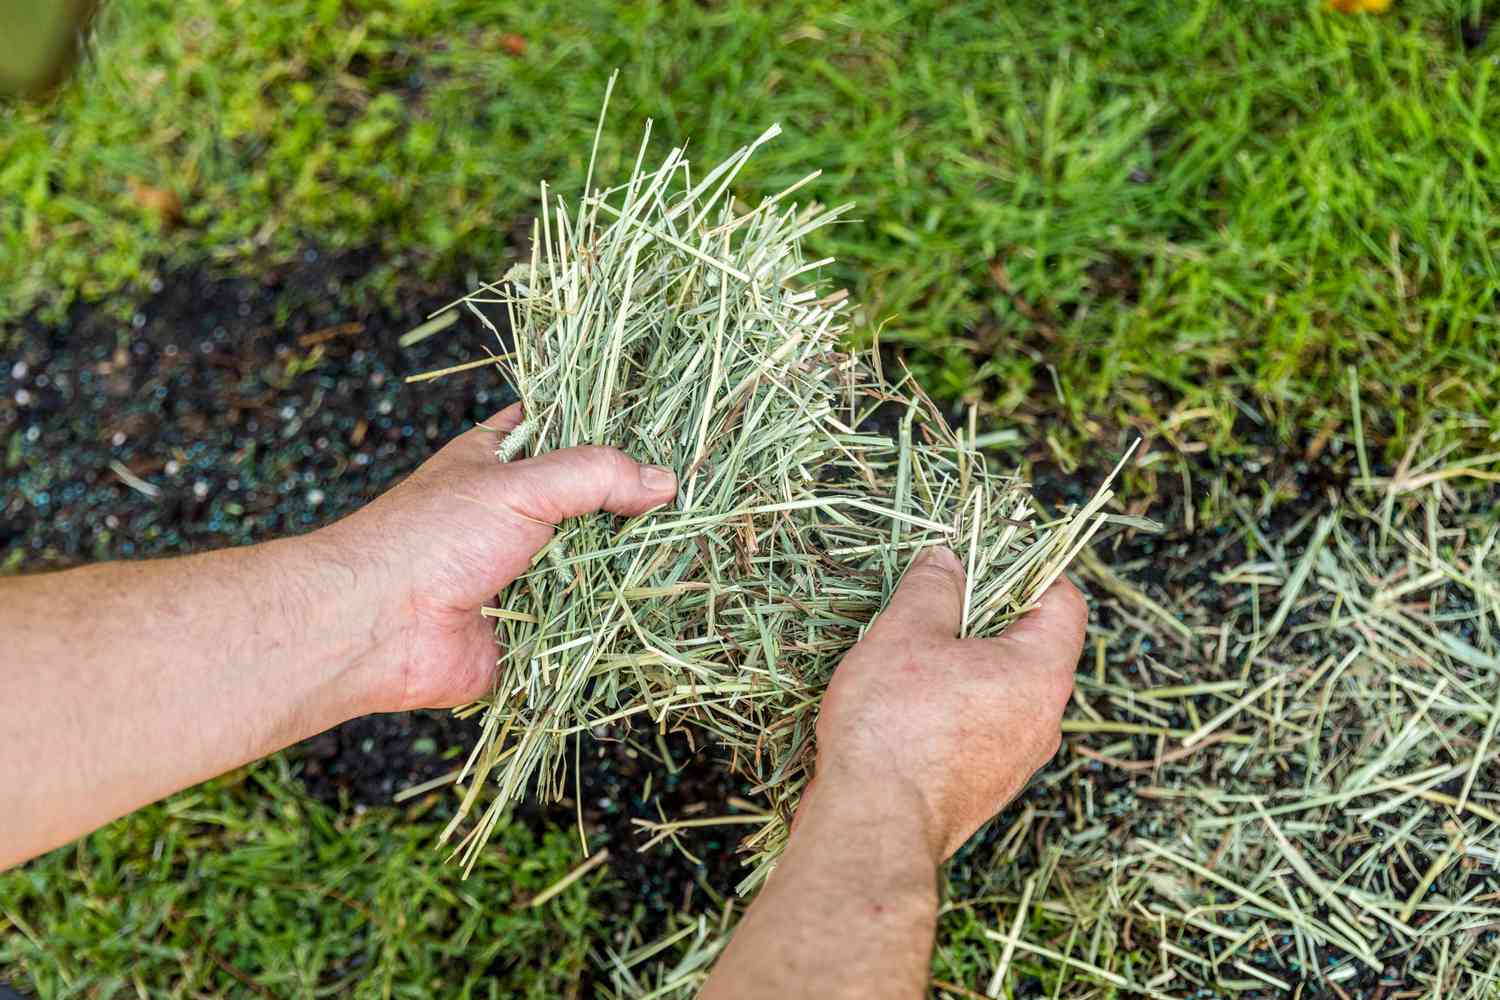 How To Lay Straw Over Grass Seed